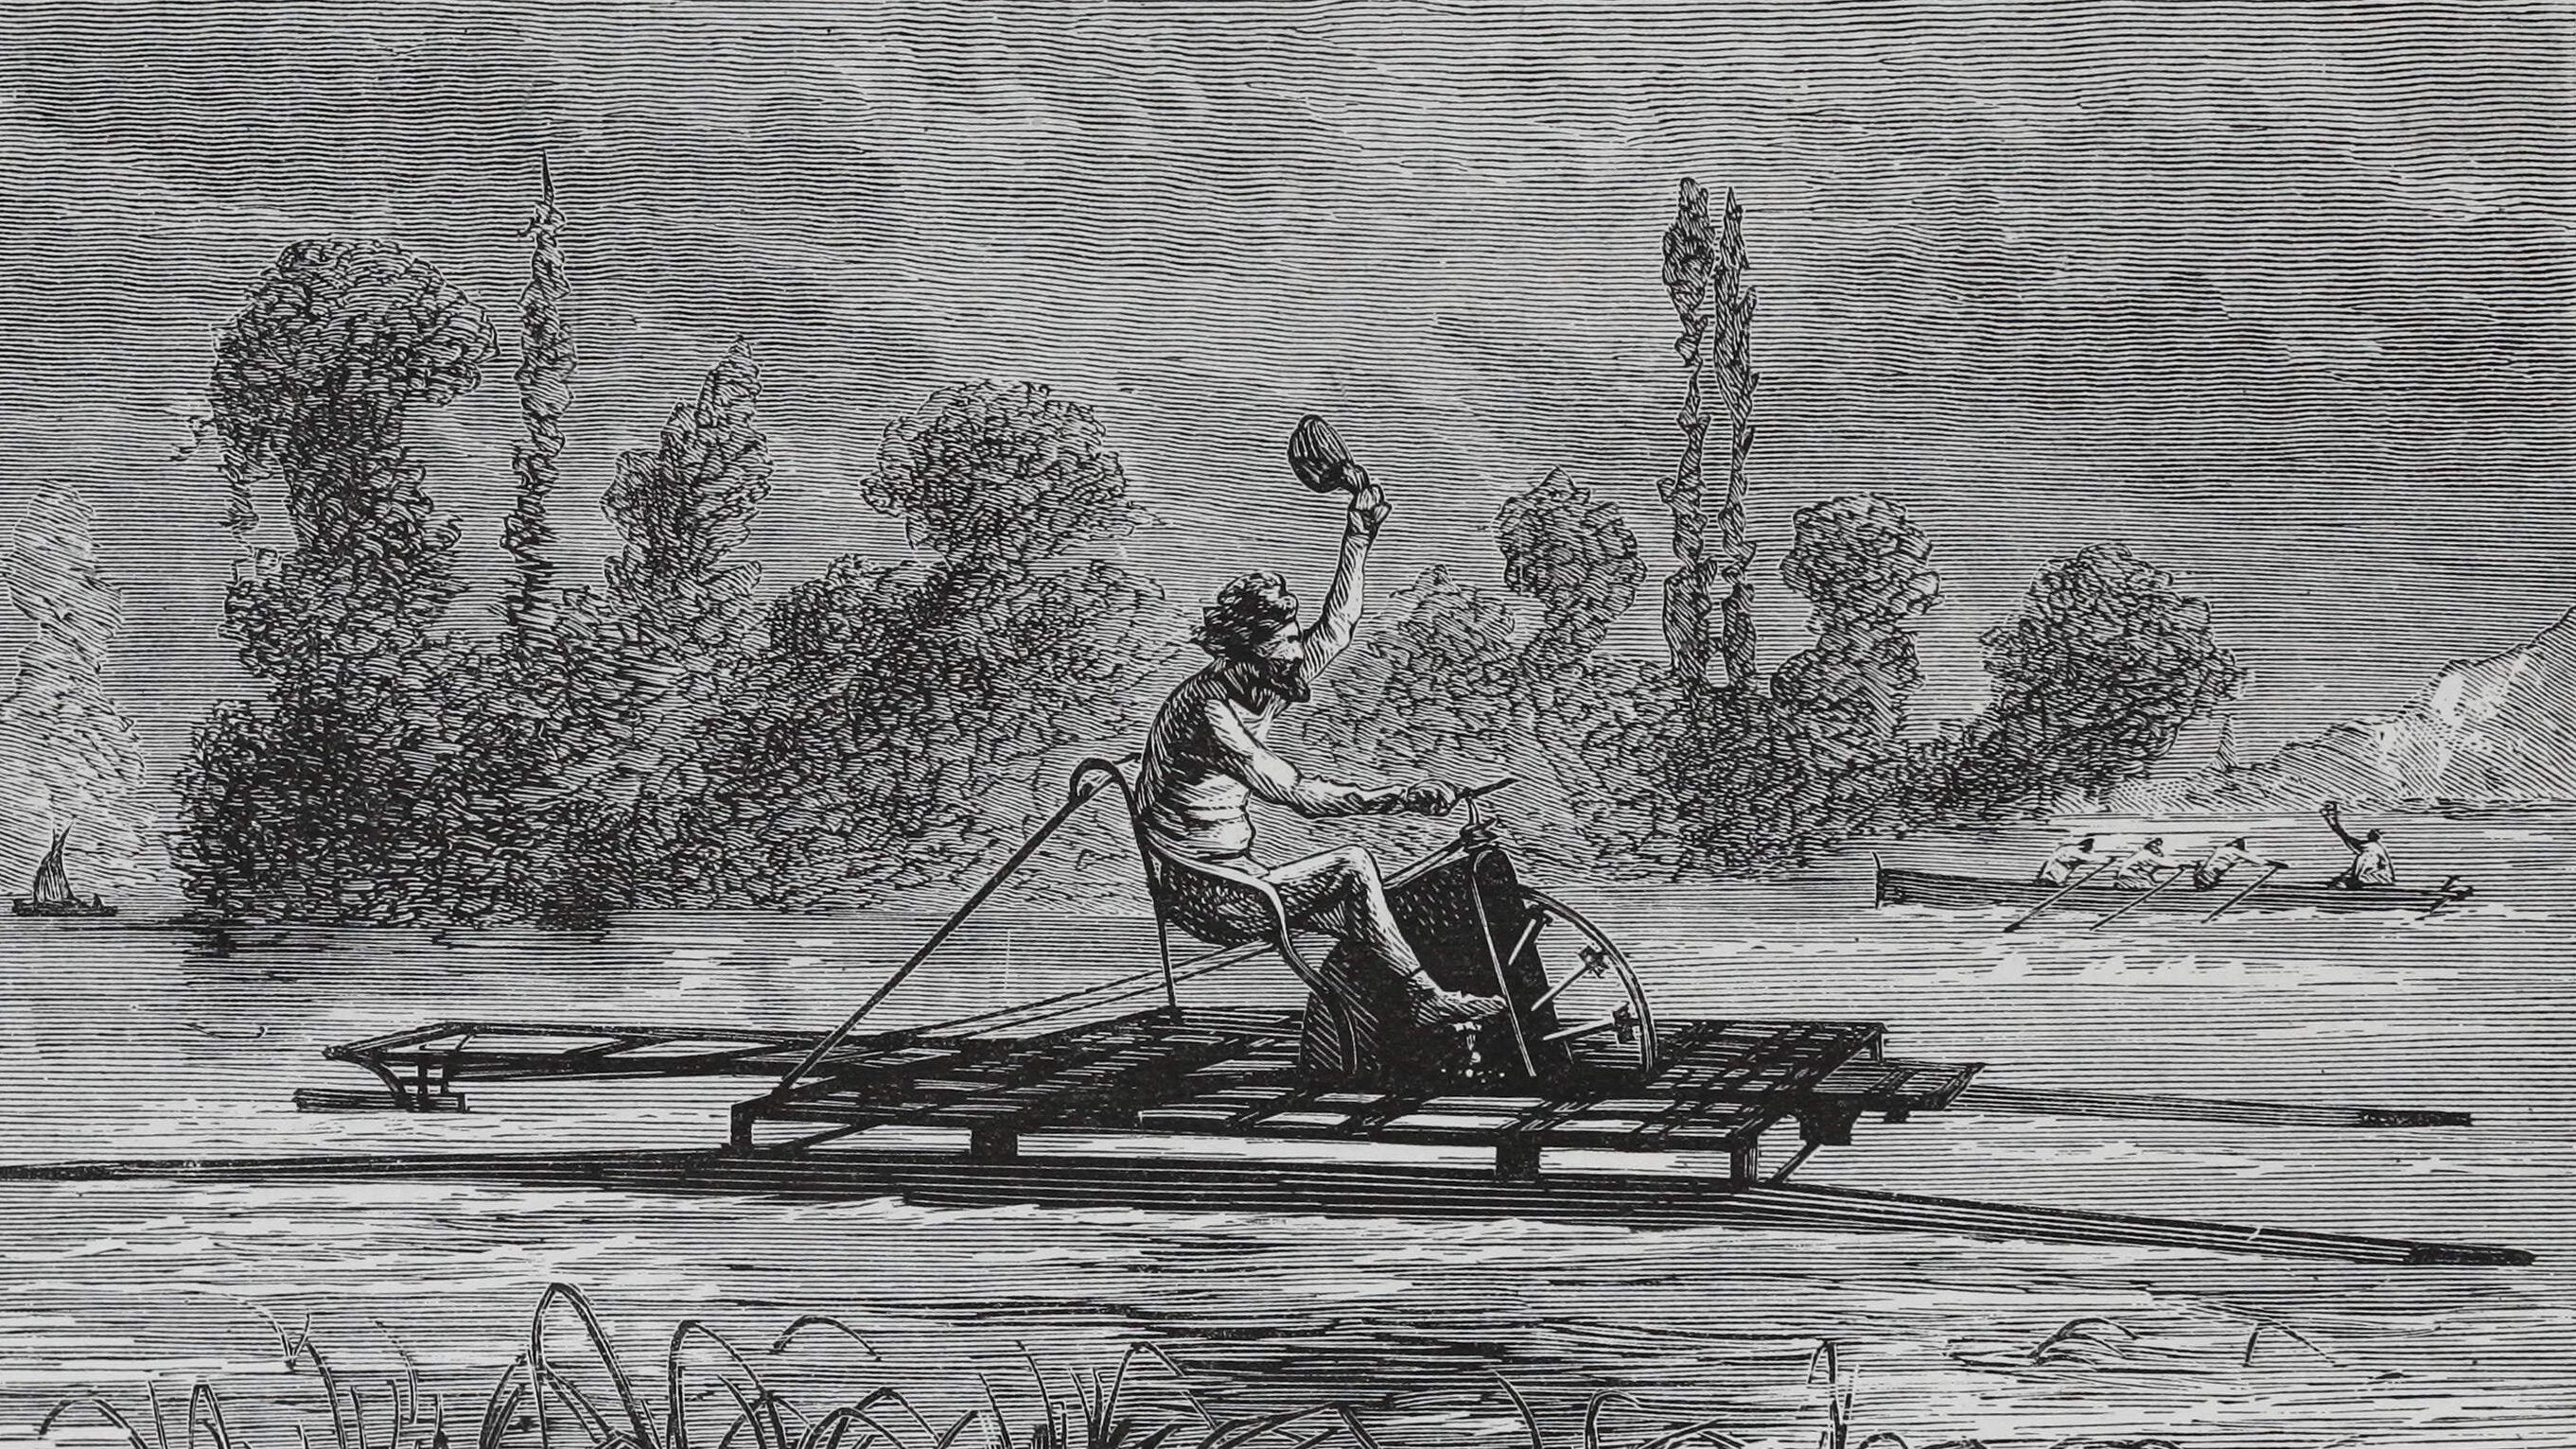 A black and white illustrated image of a man riding a hydrocycle on a lake, waving his hat in the wind